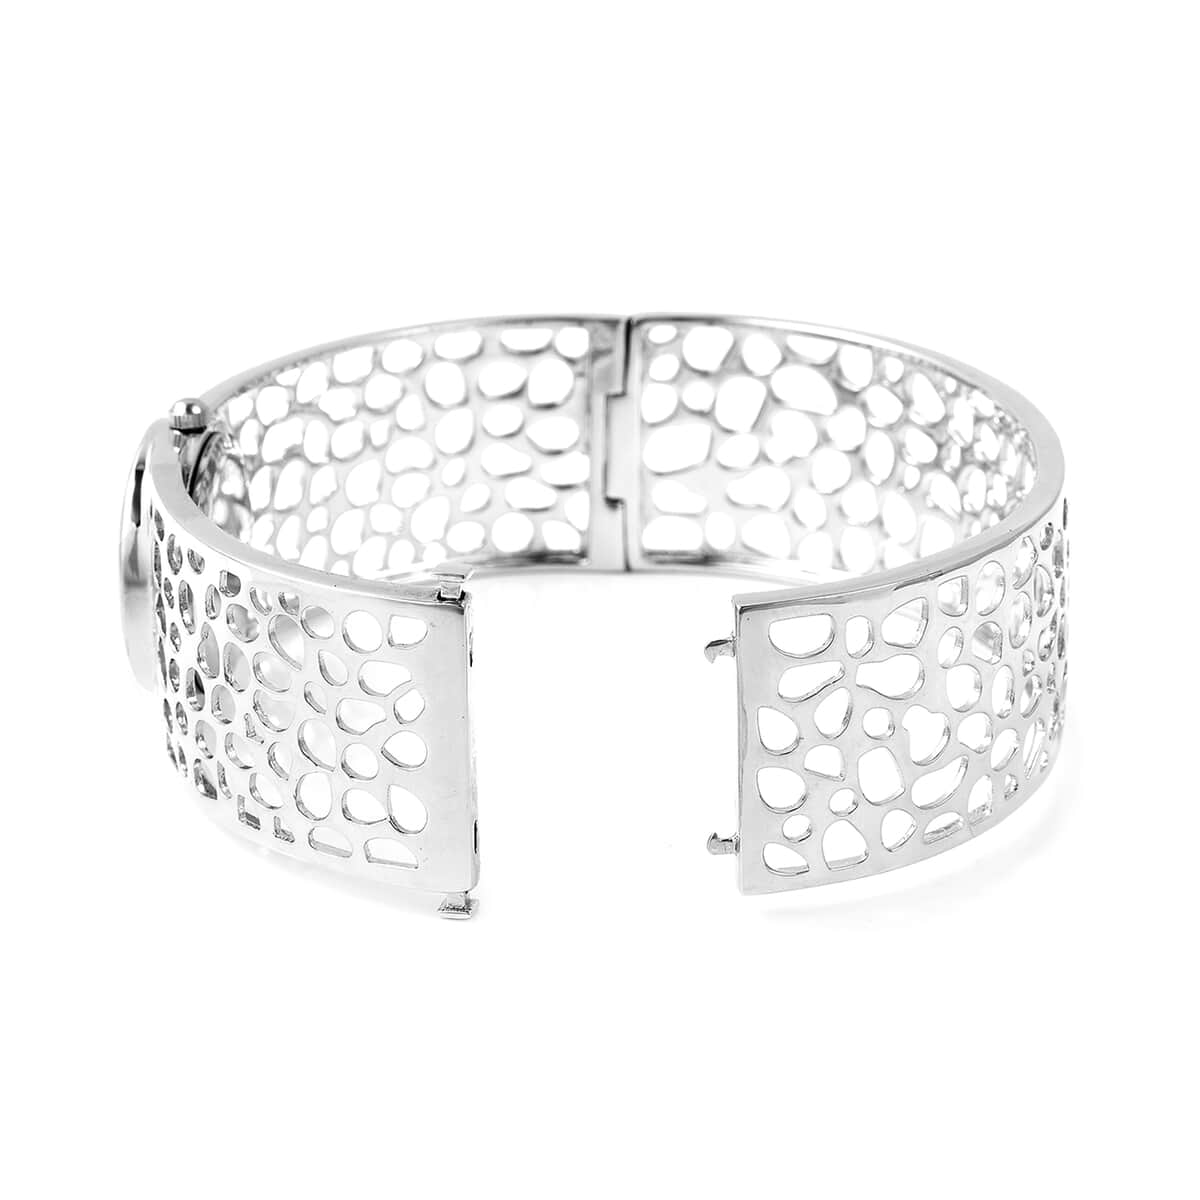 RACHEL GALLEY Swiss Movement Watch Bangle Bracelet in Sterling Silver with Stainless Steel Back (7.5 in) 52.10 Grams image number 5